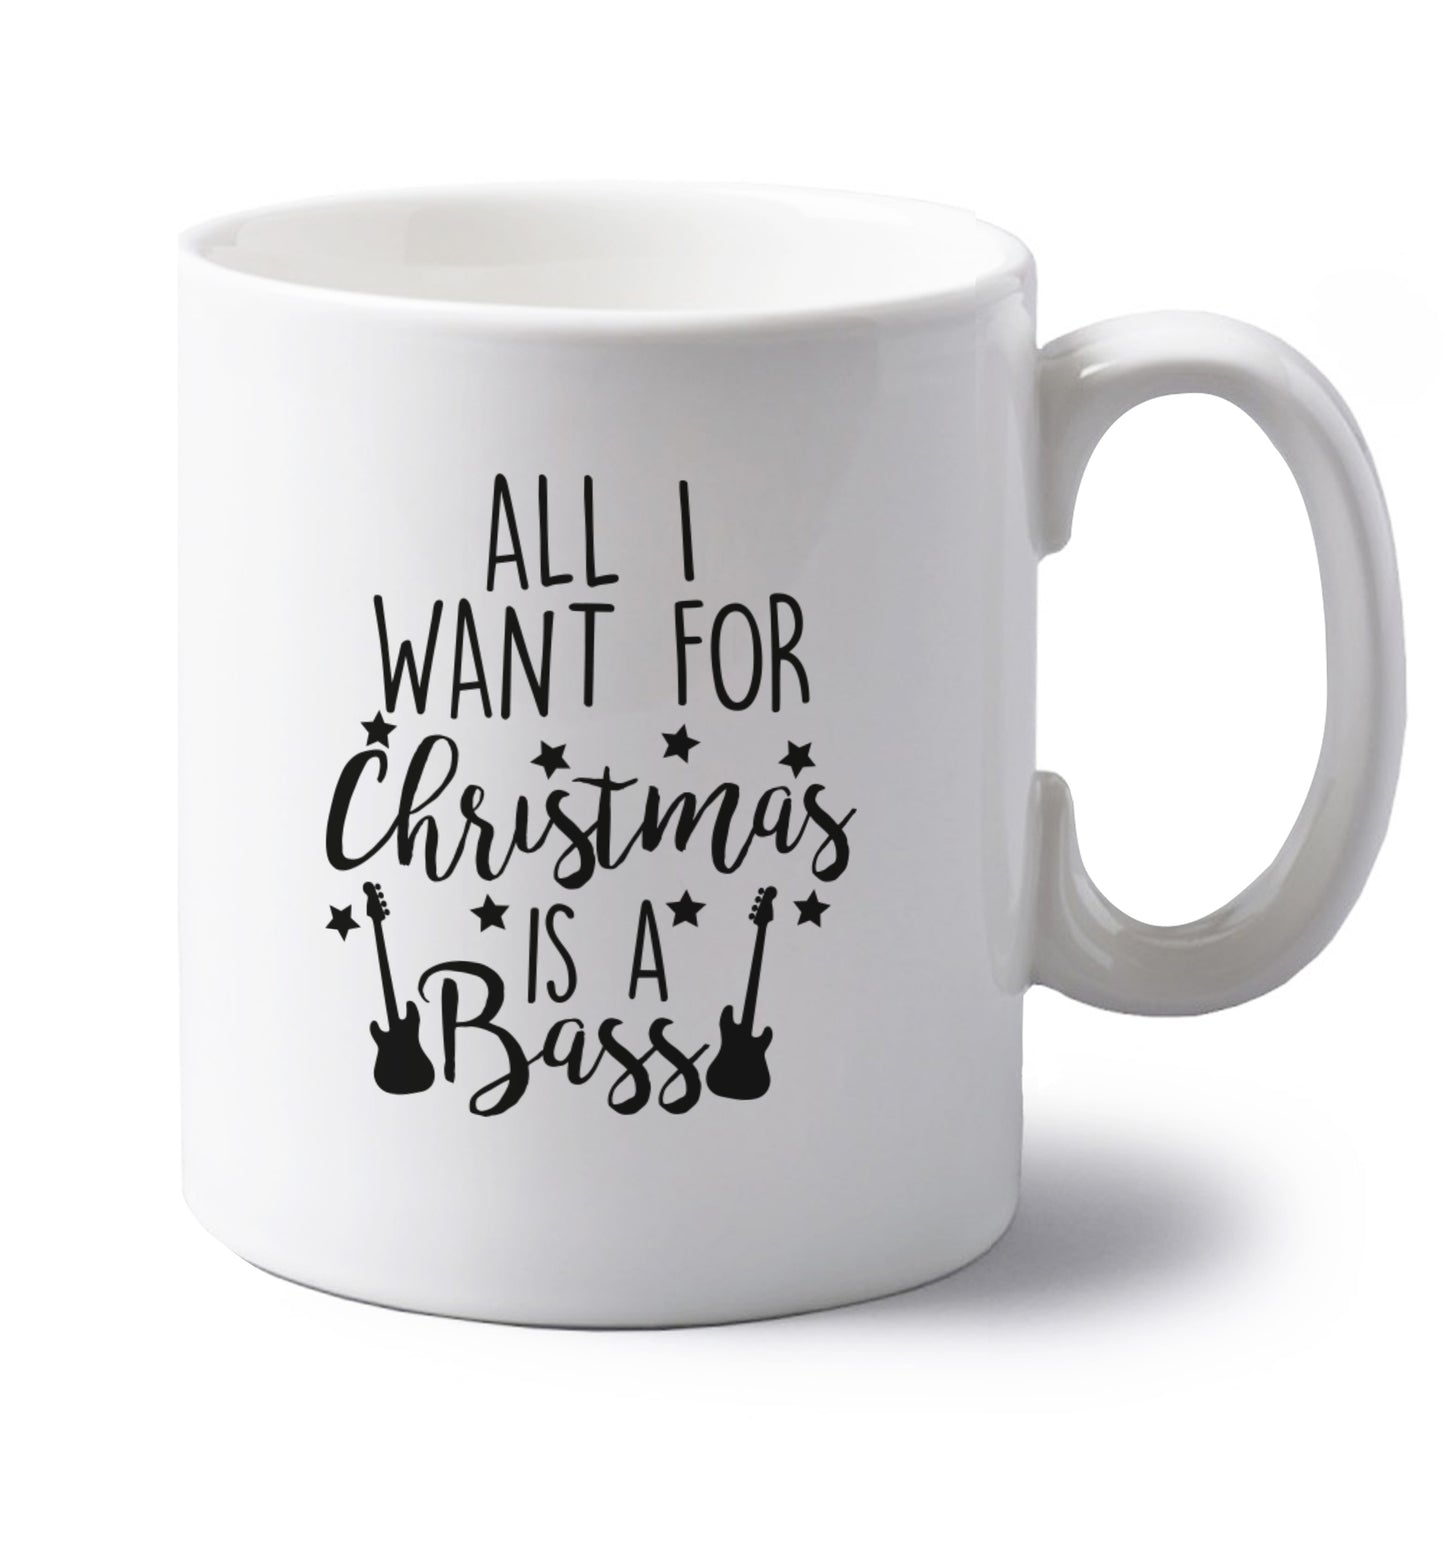 All I want for Christmas is a bass left handed white ceramic mug 